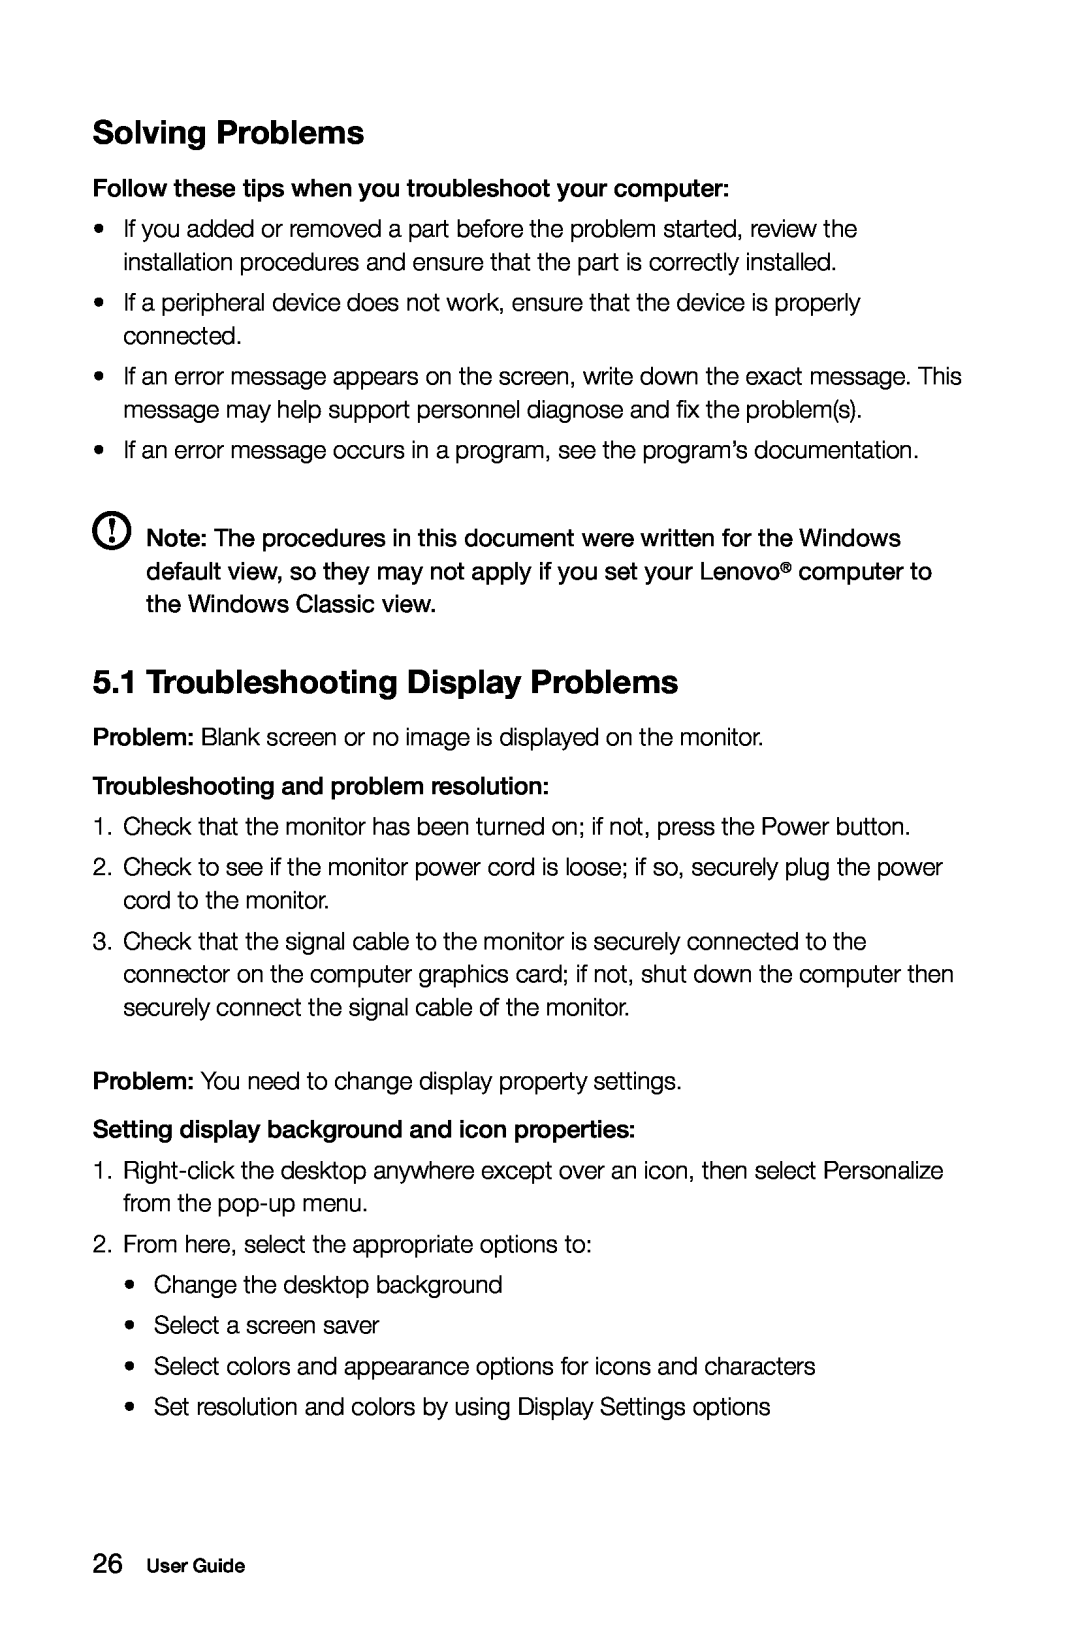 Lenovo 10041-10049 manual Solving Problems, Troubleshooting Display Problems 